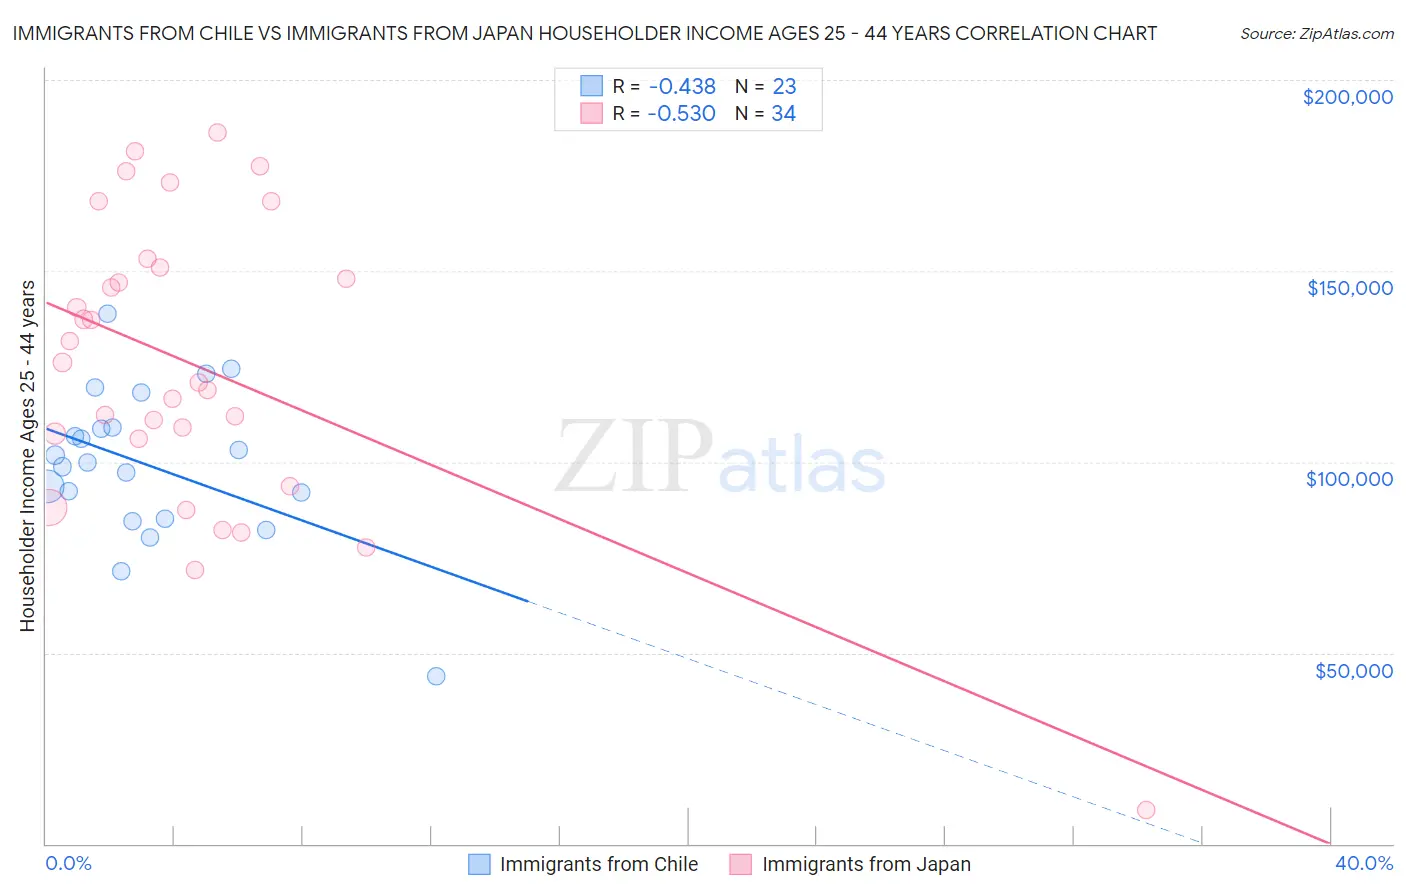 Immigrants from Chile vs Immigrants from Japan Householder Income Ages 25 - 44 years